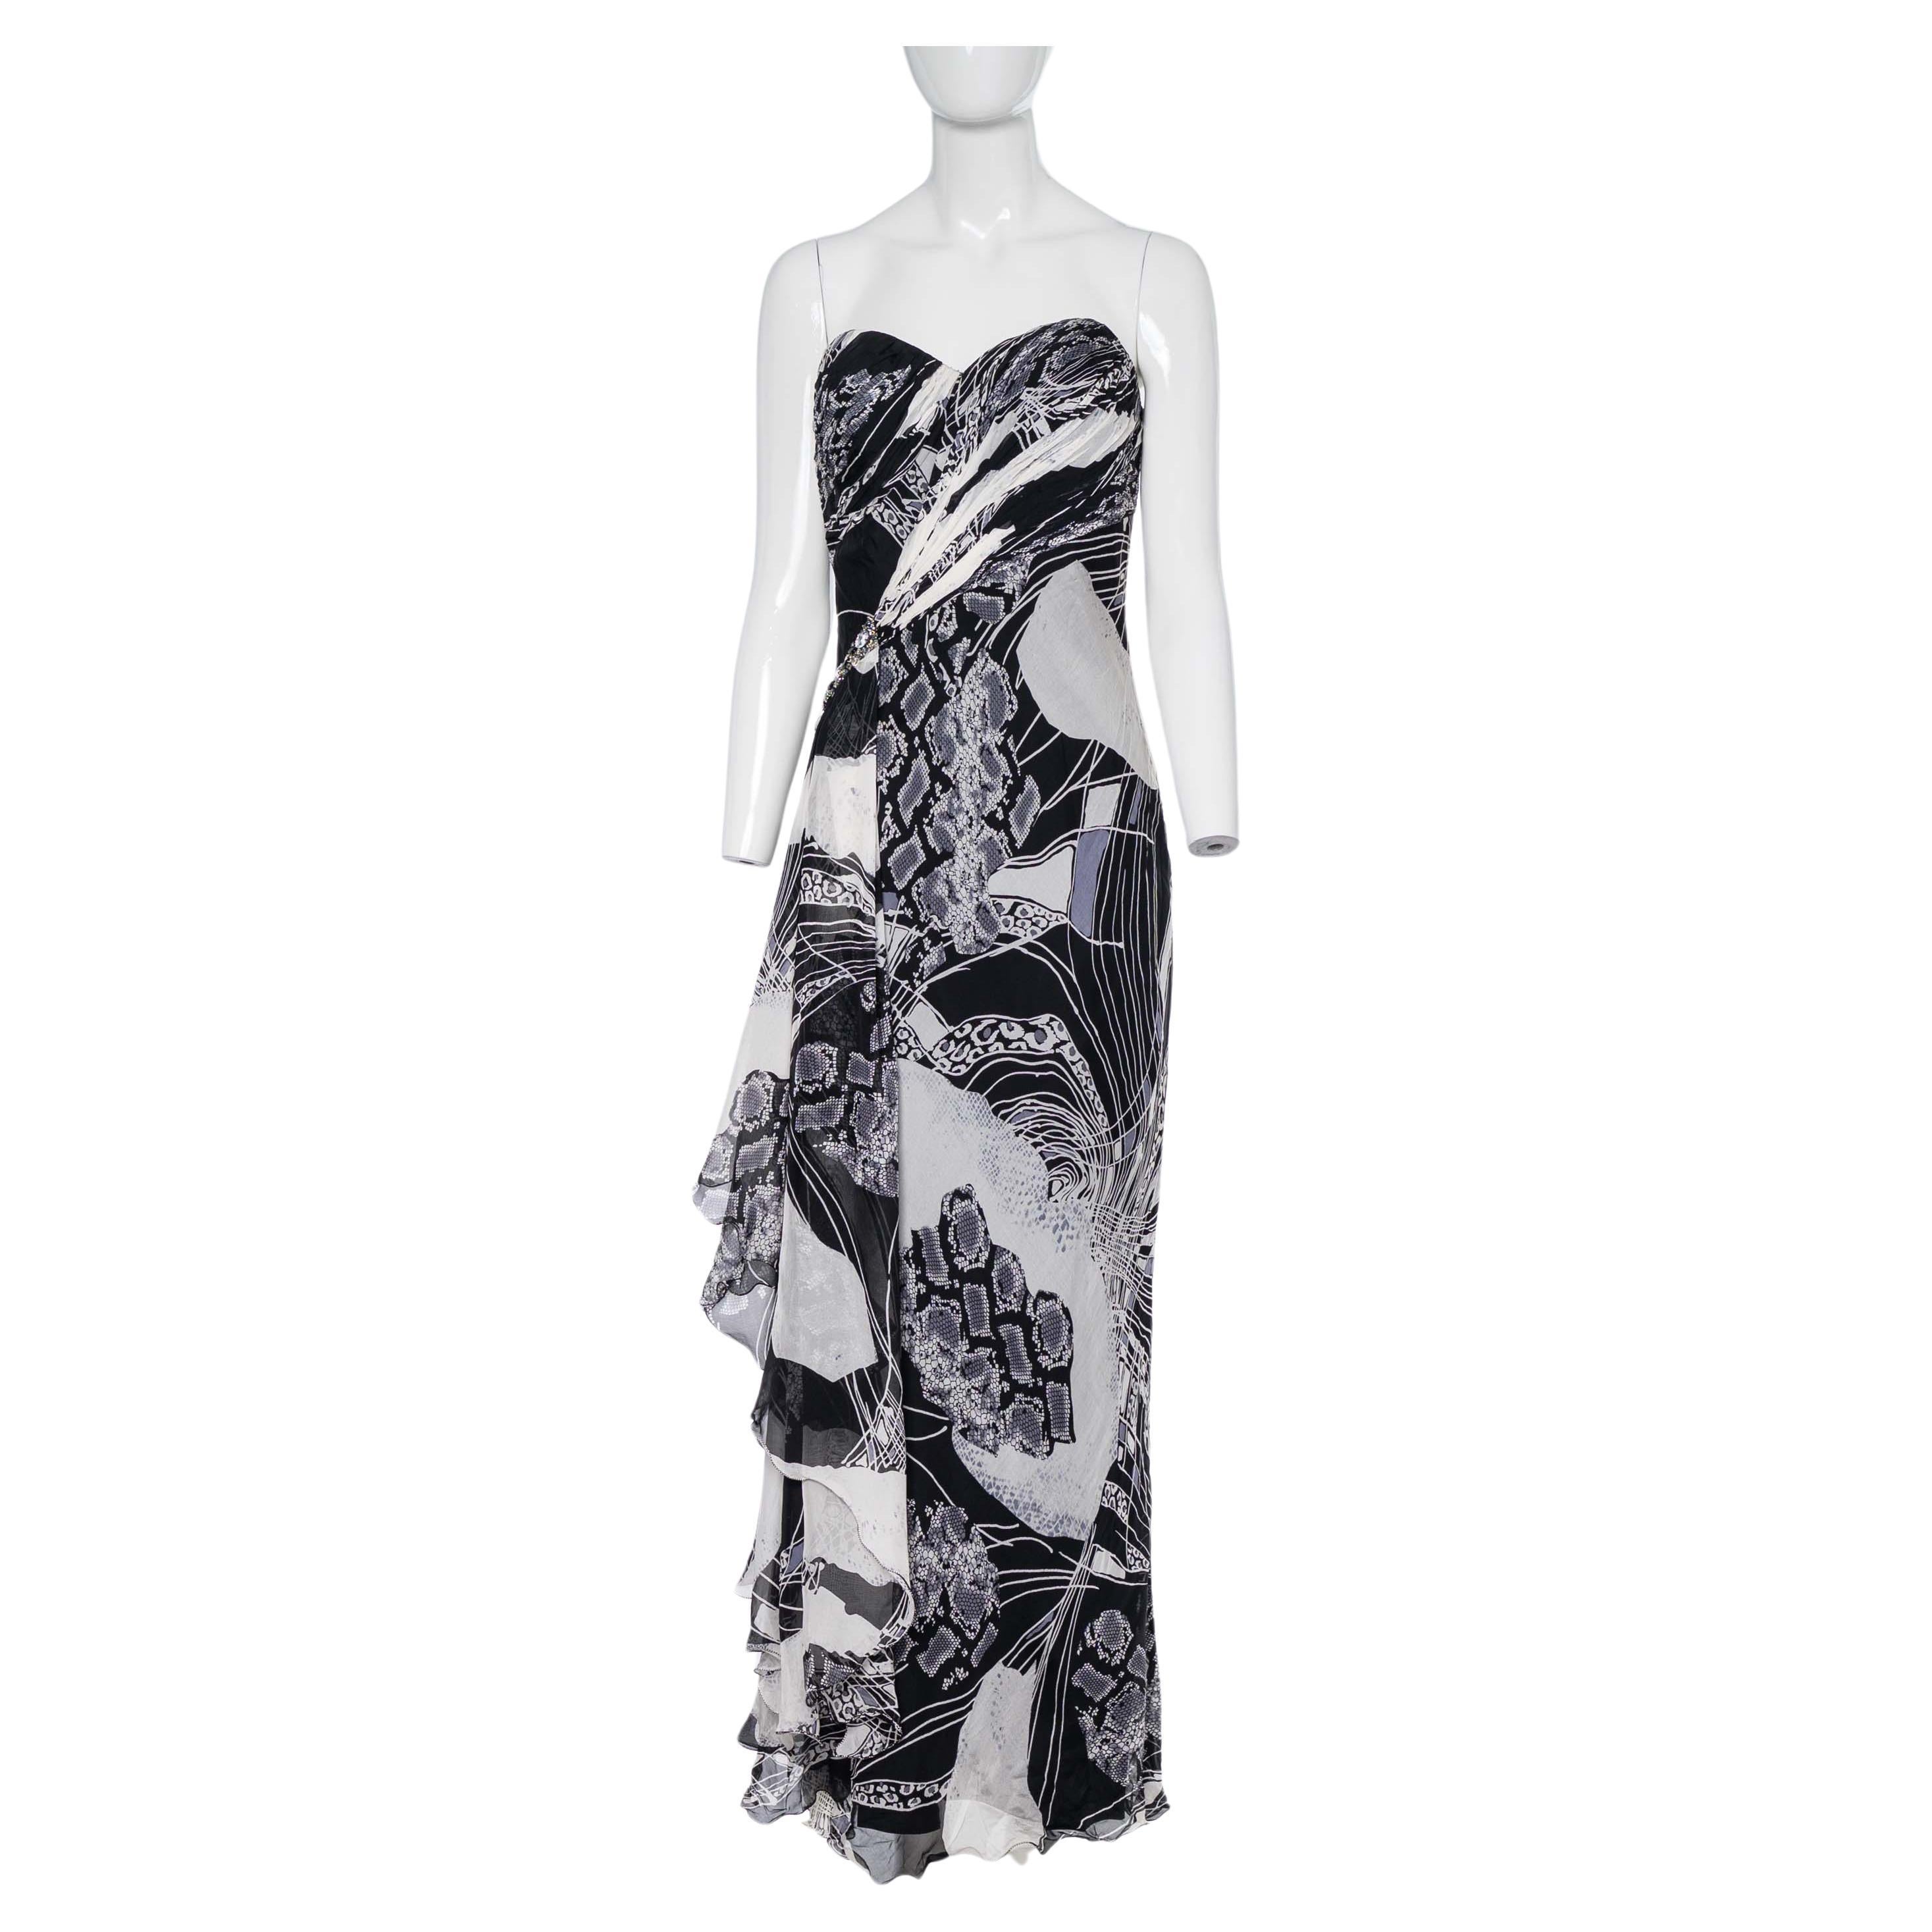 2000s Diane Freis Monochrome Abstract Print Strapless Evening Dress For Sale